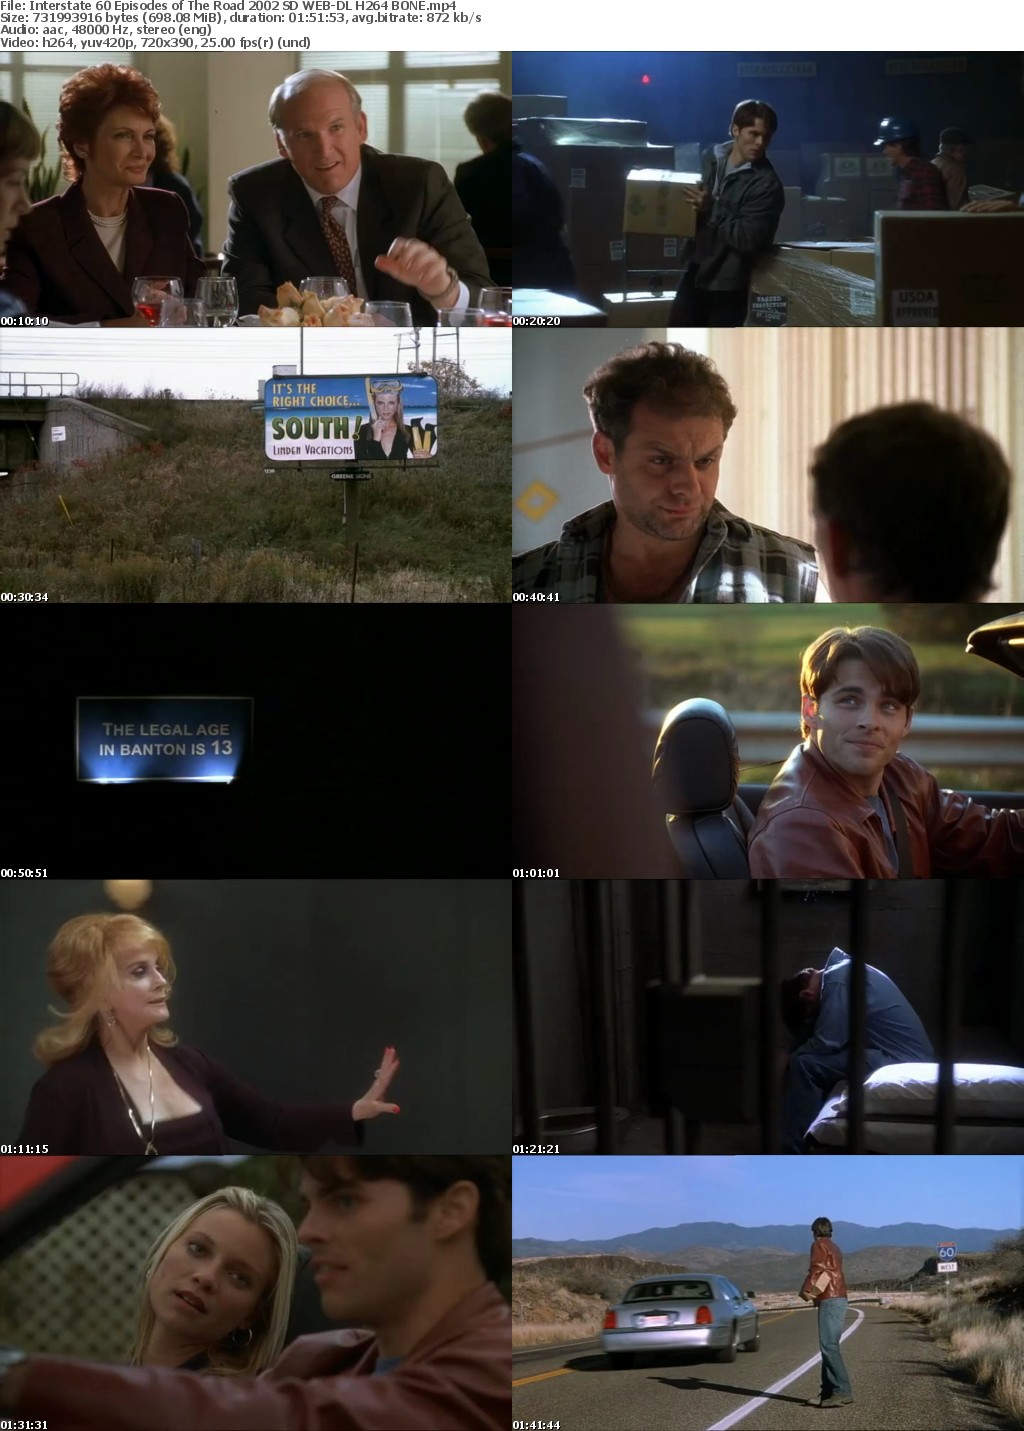 Interstate 60 Episodes of The Road 2002 SD WEB-DL H264 BONE